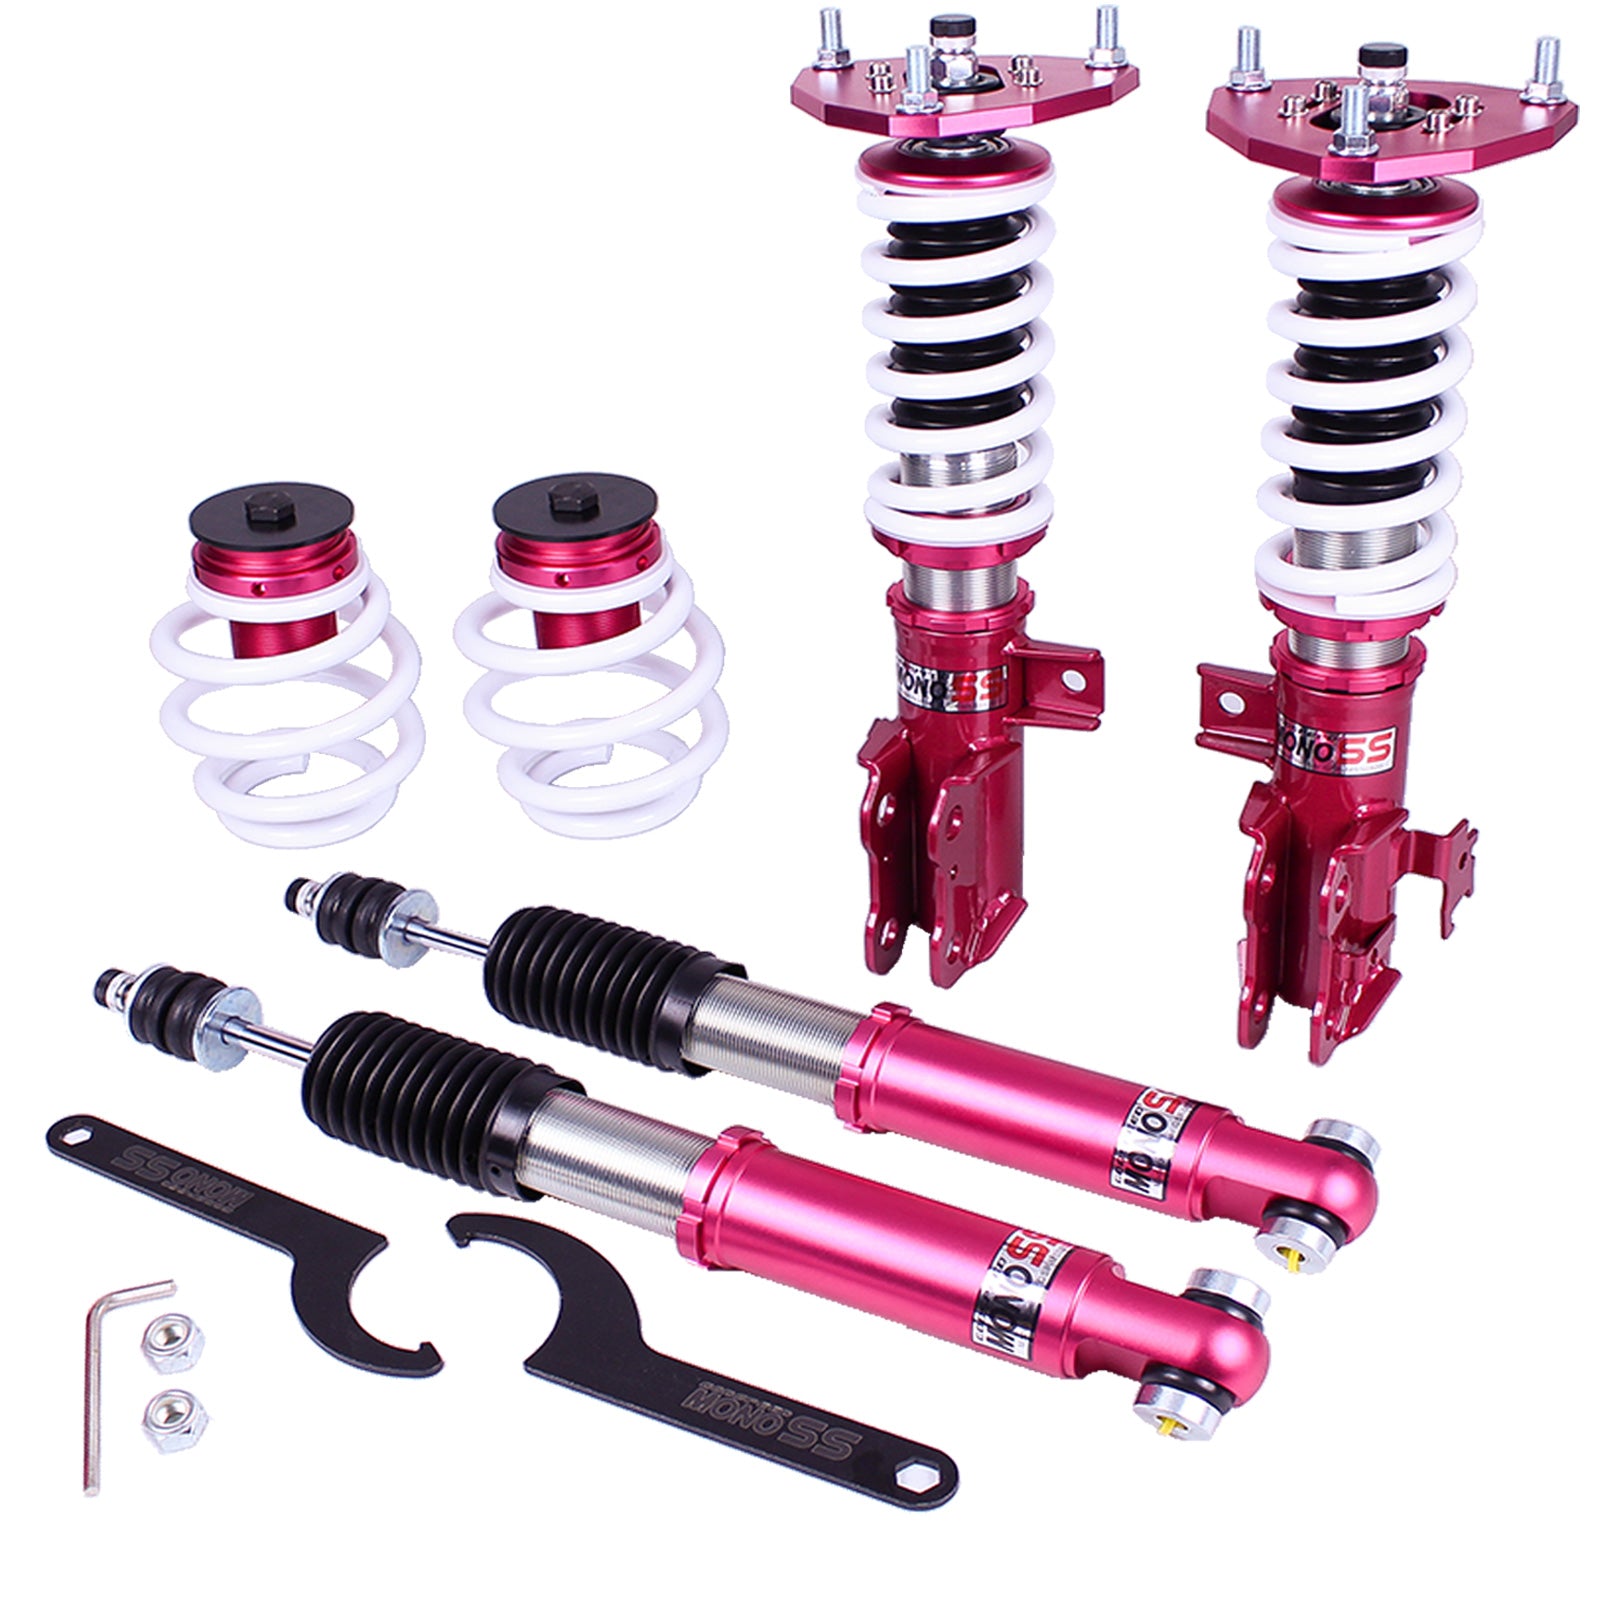 Godspeed MSS0920-B MonoSS Coilover Lowering Kit, Fully Adjustable, Ride Height, Spring Tension And 16 Click Damping, Scion iM (E180) 2015-16